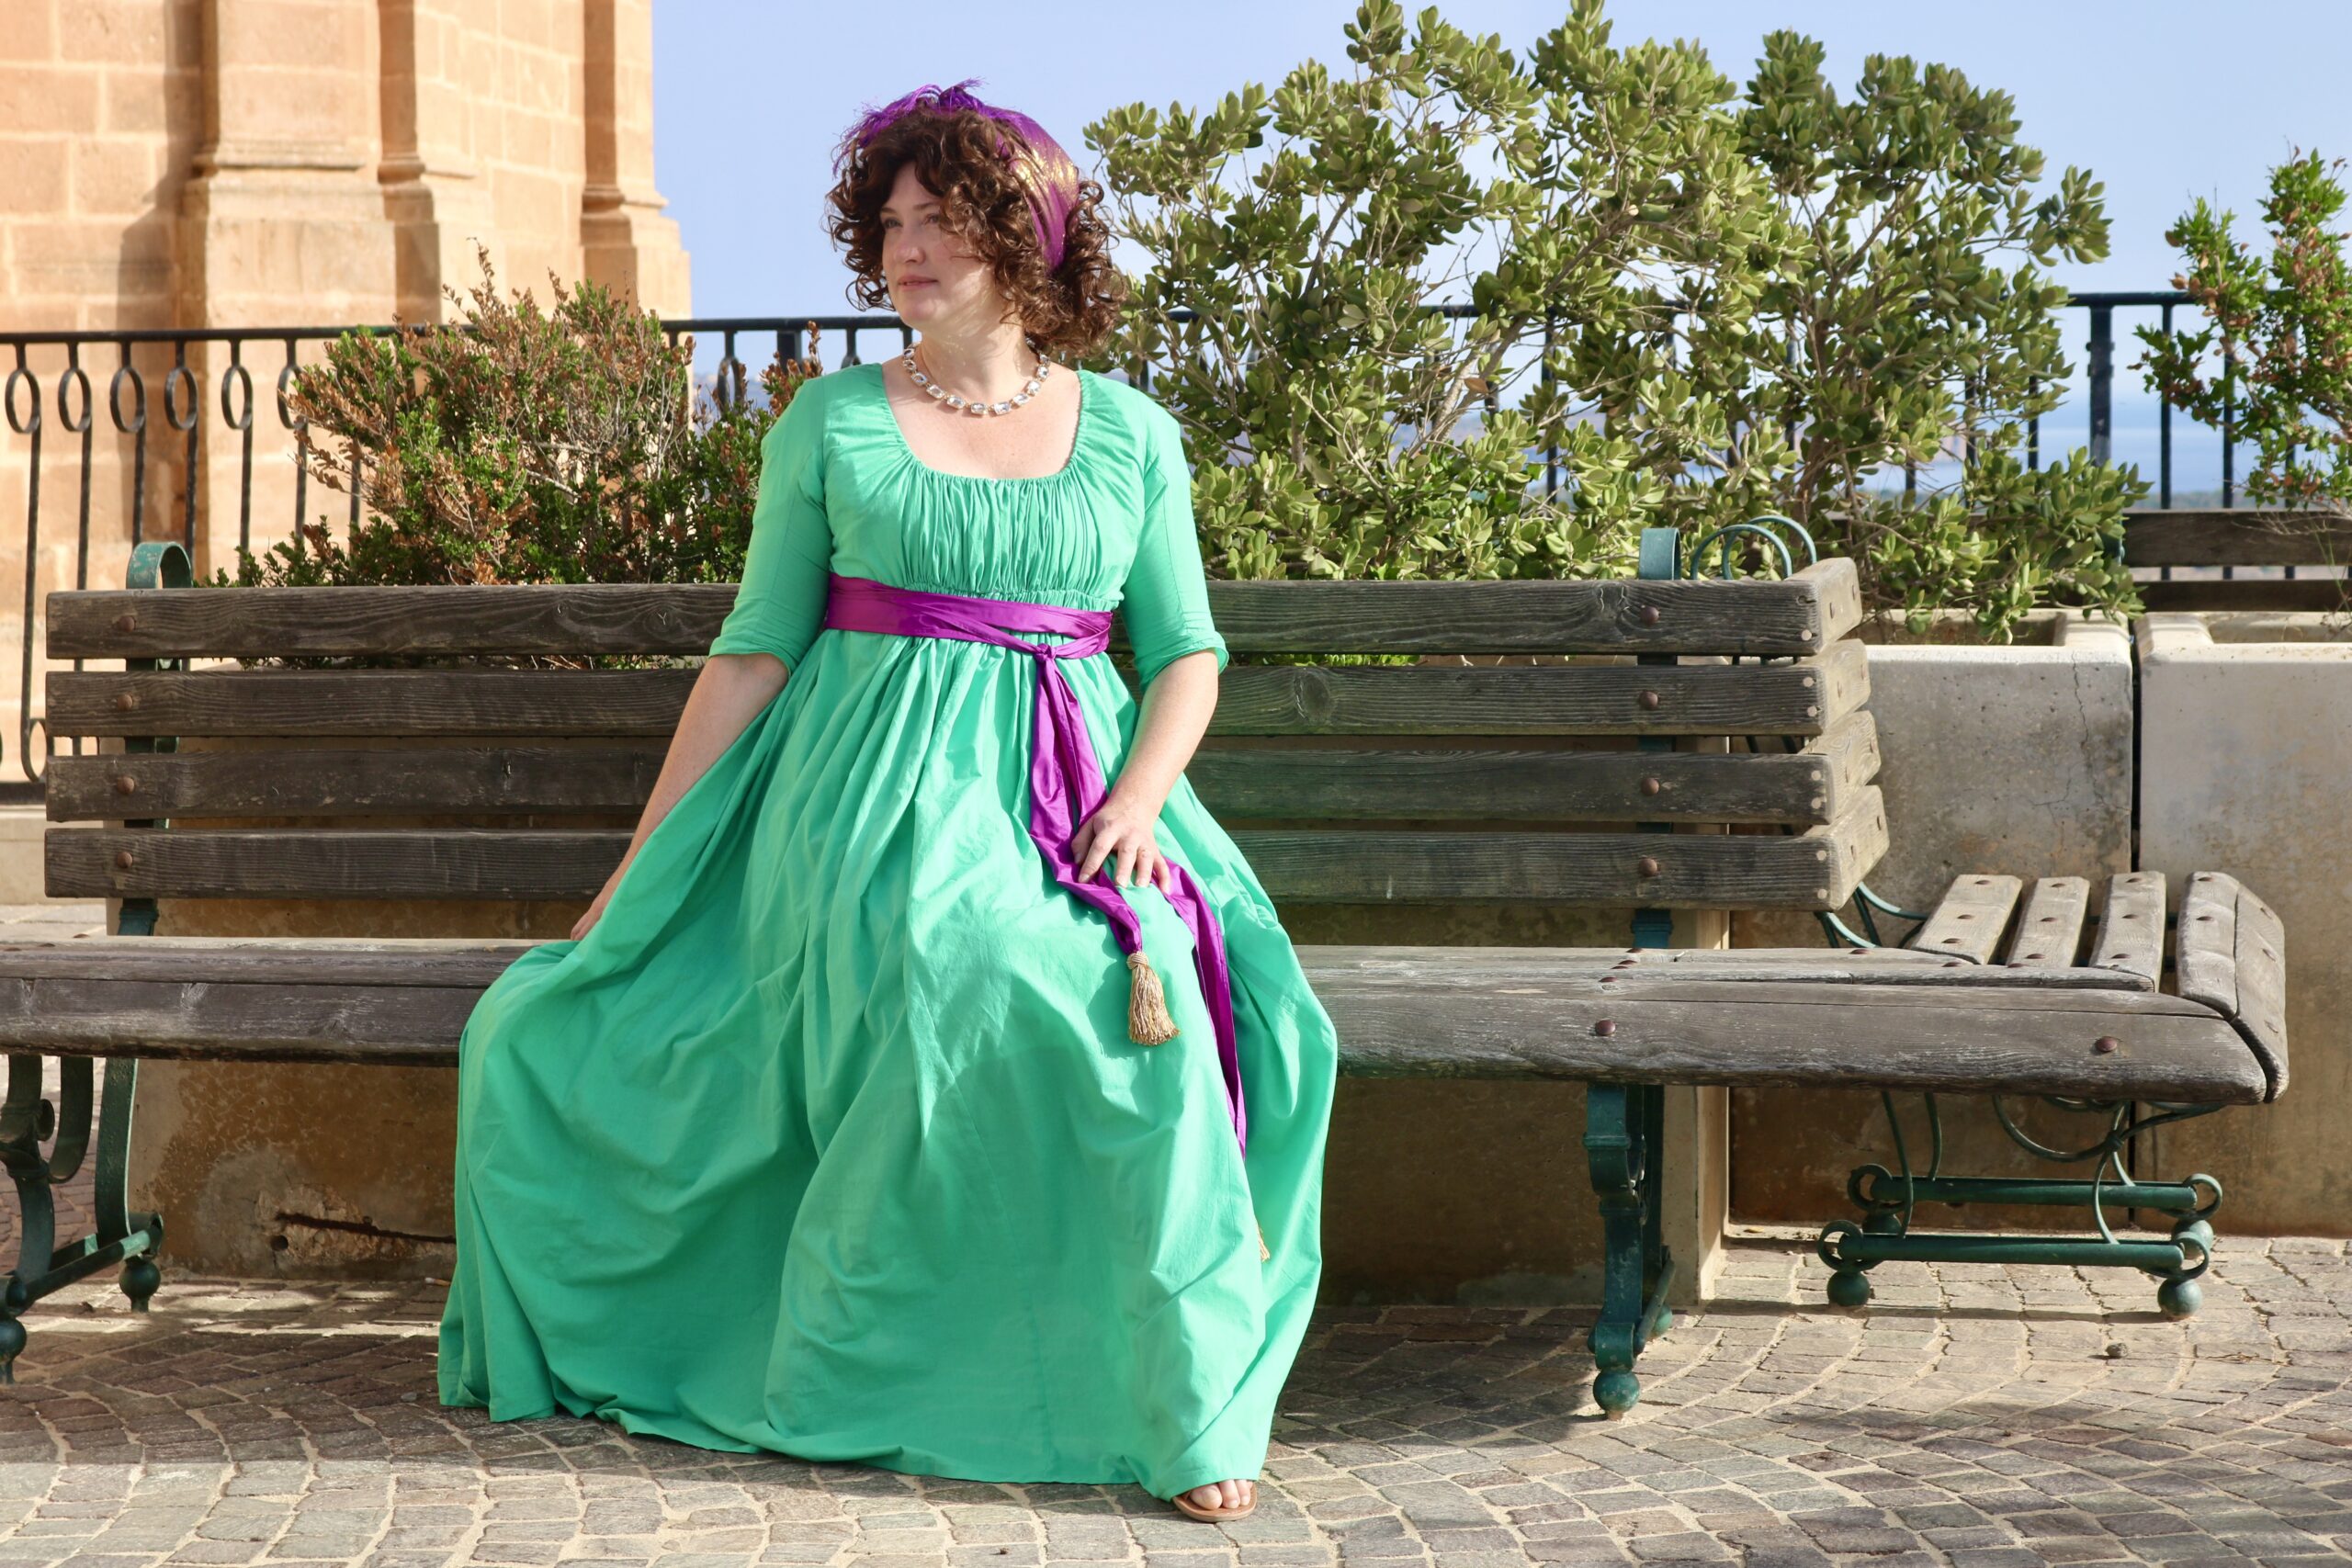 Tabubilgirl sits on a bench. She is wearing a green 1790s round gown with a purple sash.